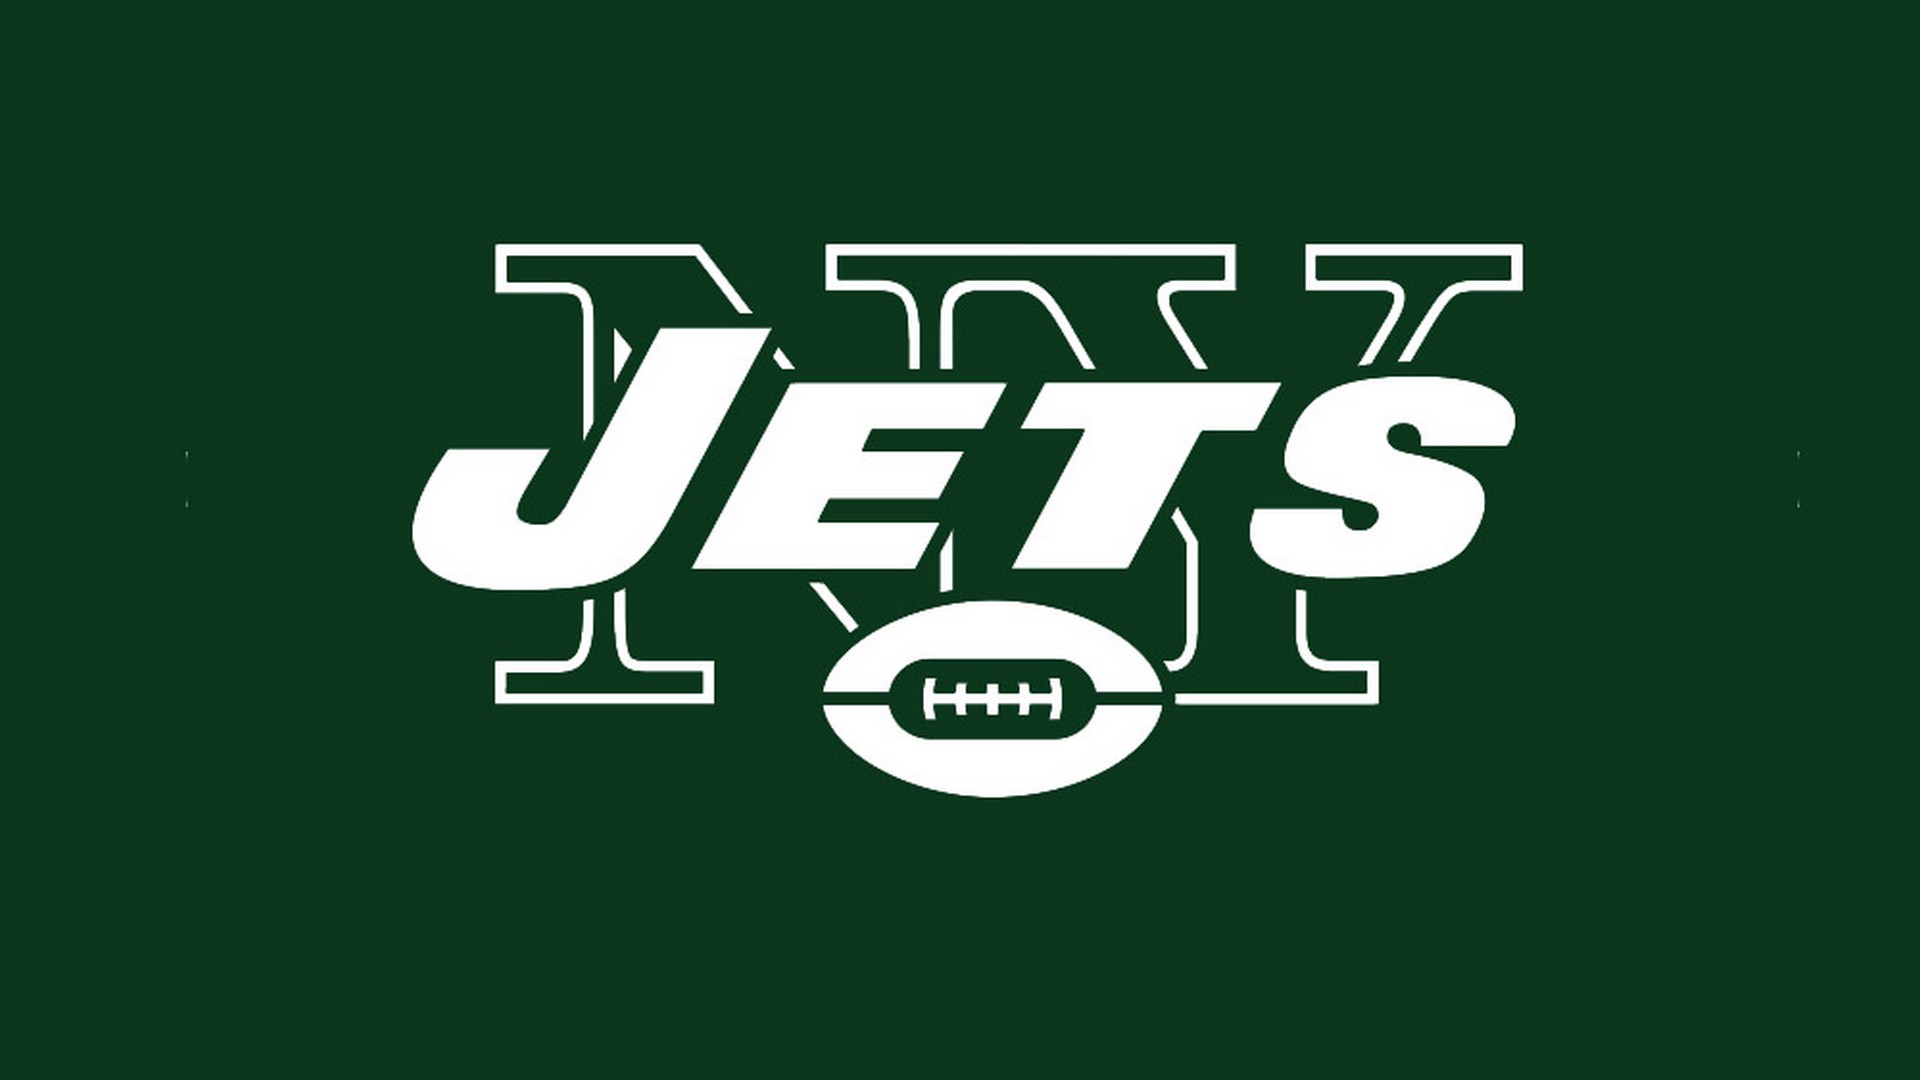 Hd Desktop Wallpaper New York Jets With Resolution - Logos And Uniforms Of The New York Jets - HD Wallpaper 